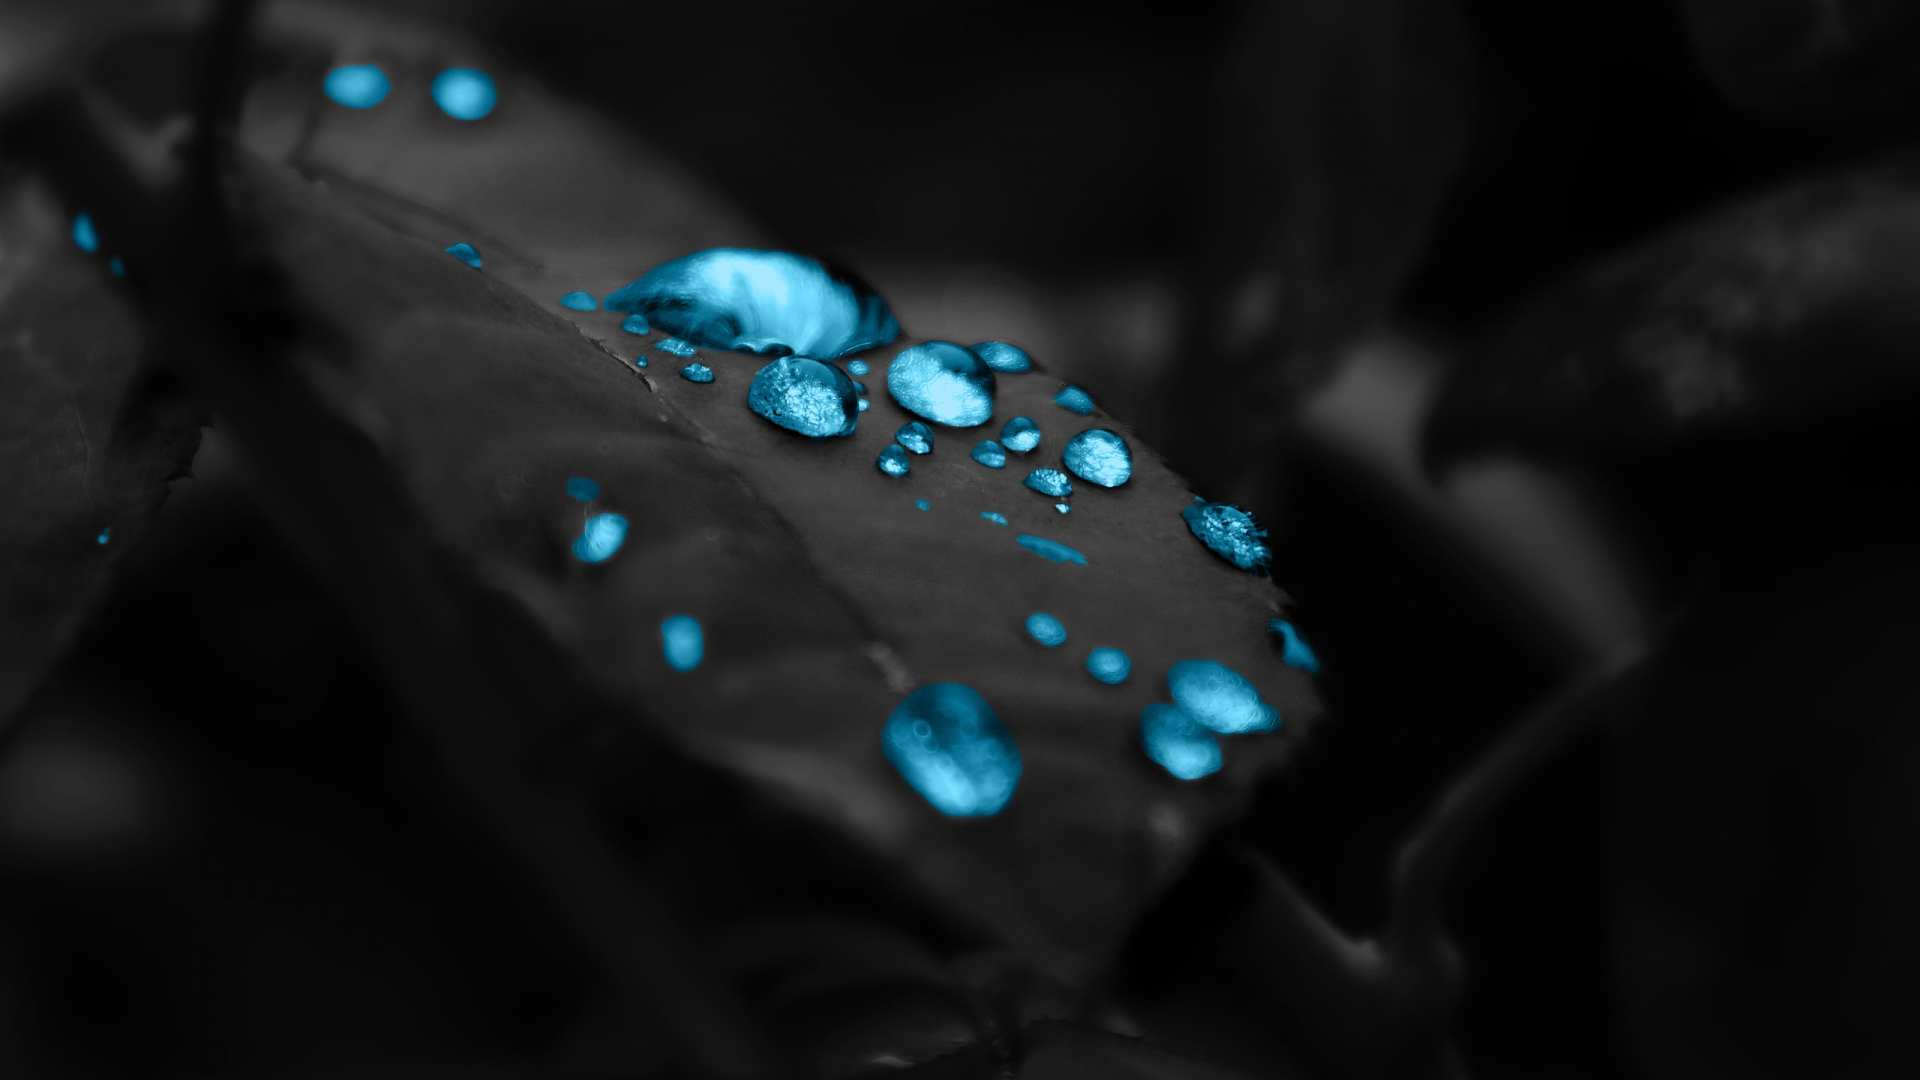 Turquoise Water Drops for 1920 x 1080 HDTV 1080p resolution